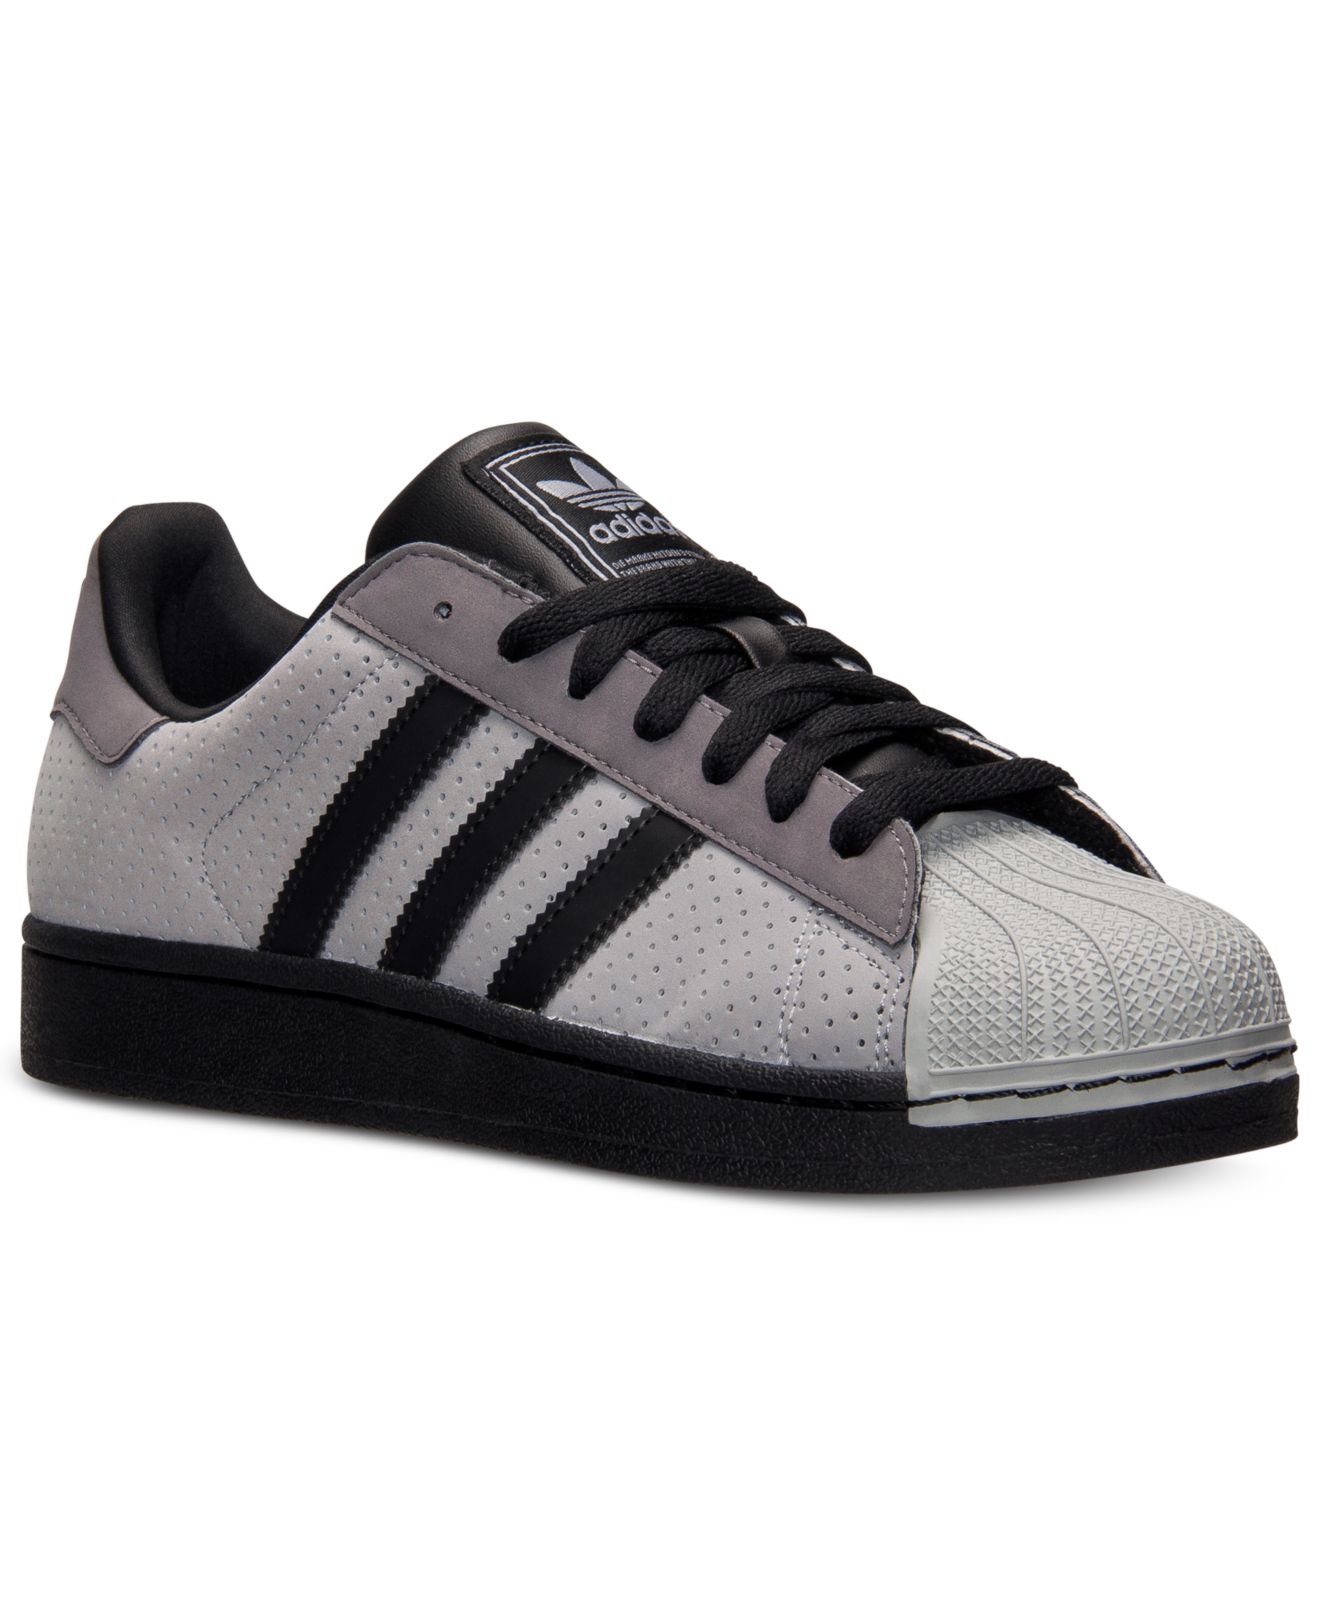 Lyst - adidas Men'S Superstar 2 Casual Sneakers From Finish Line in ...